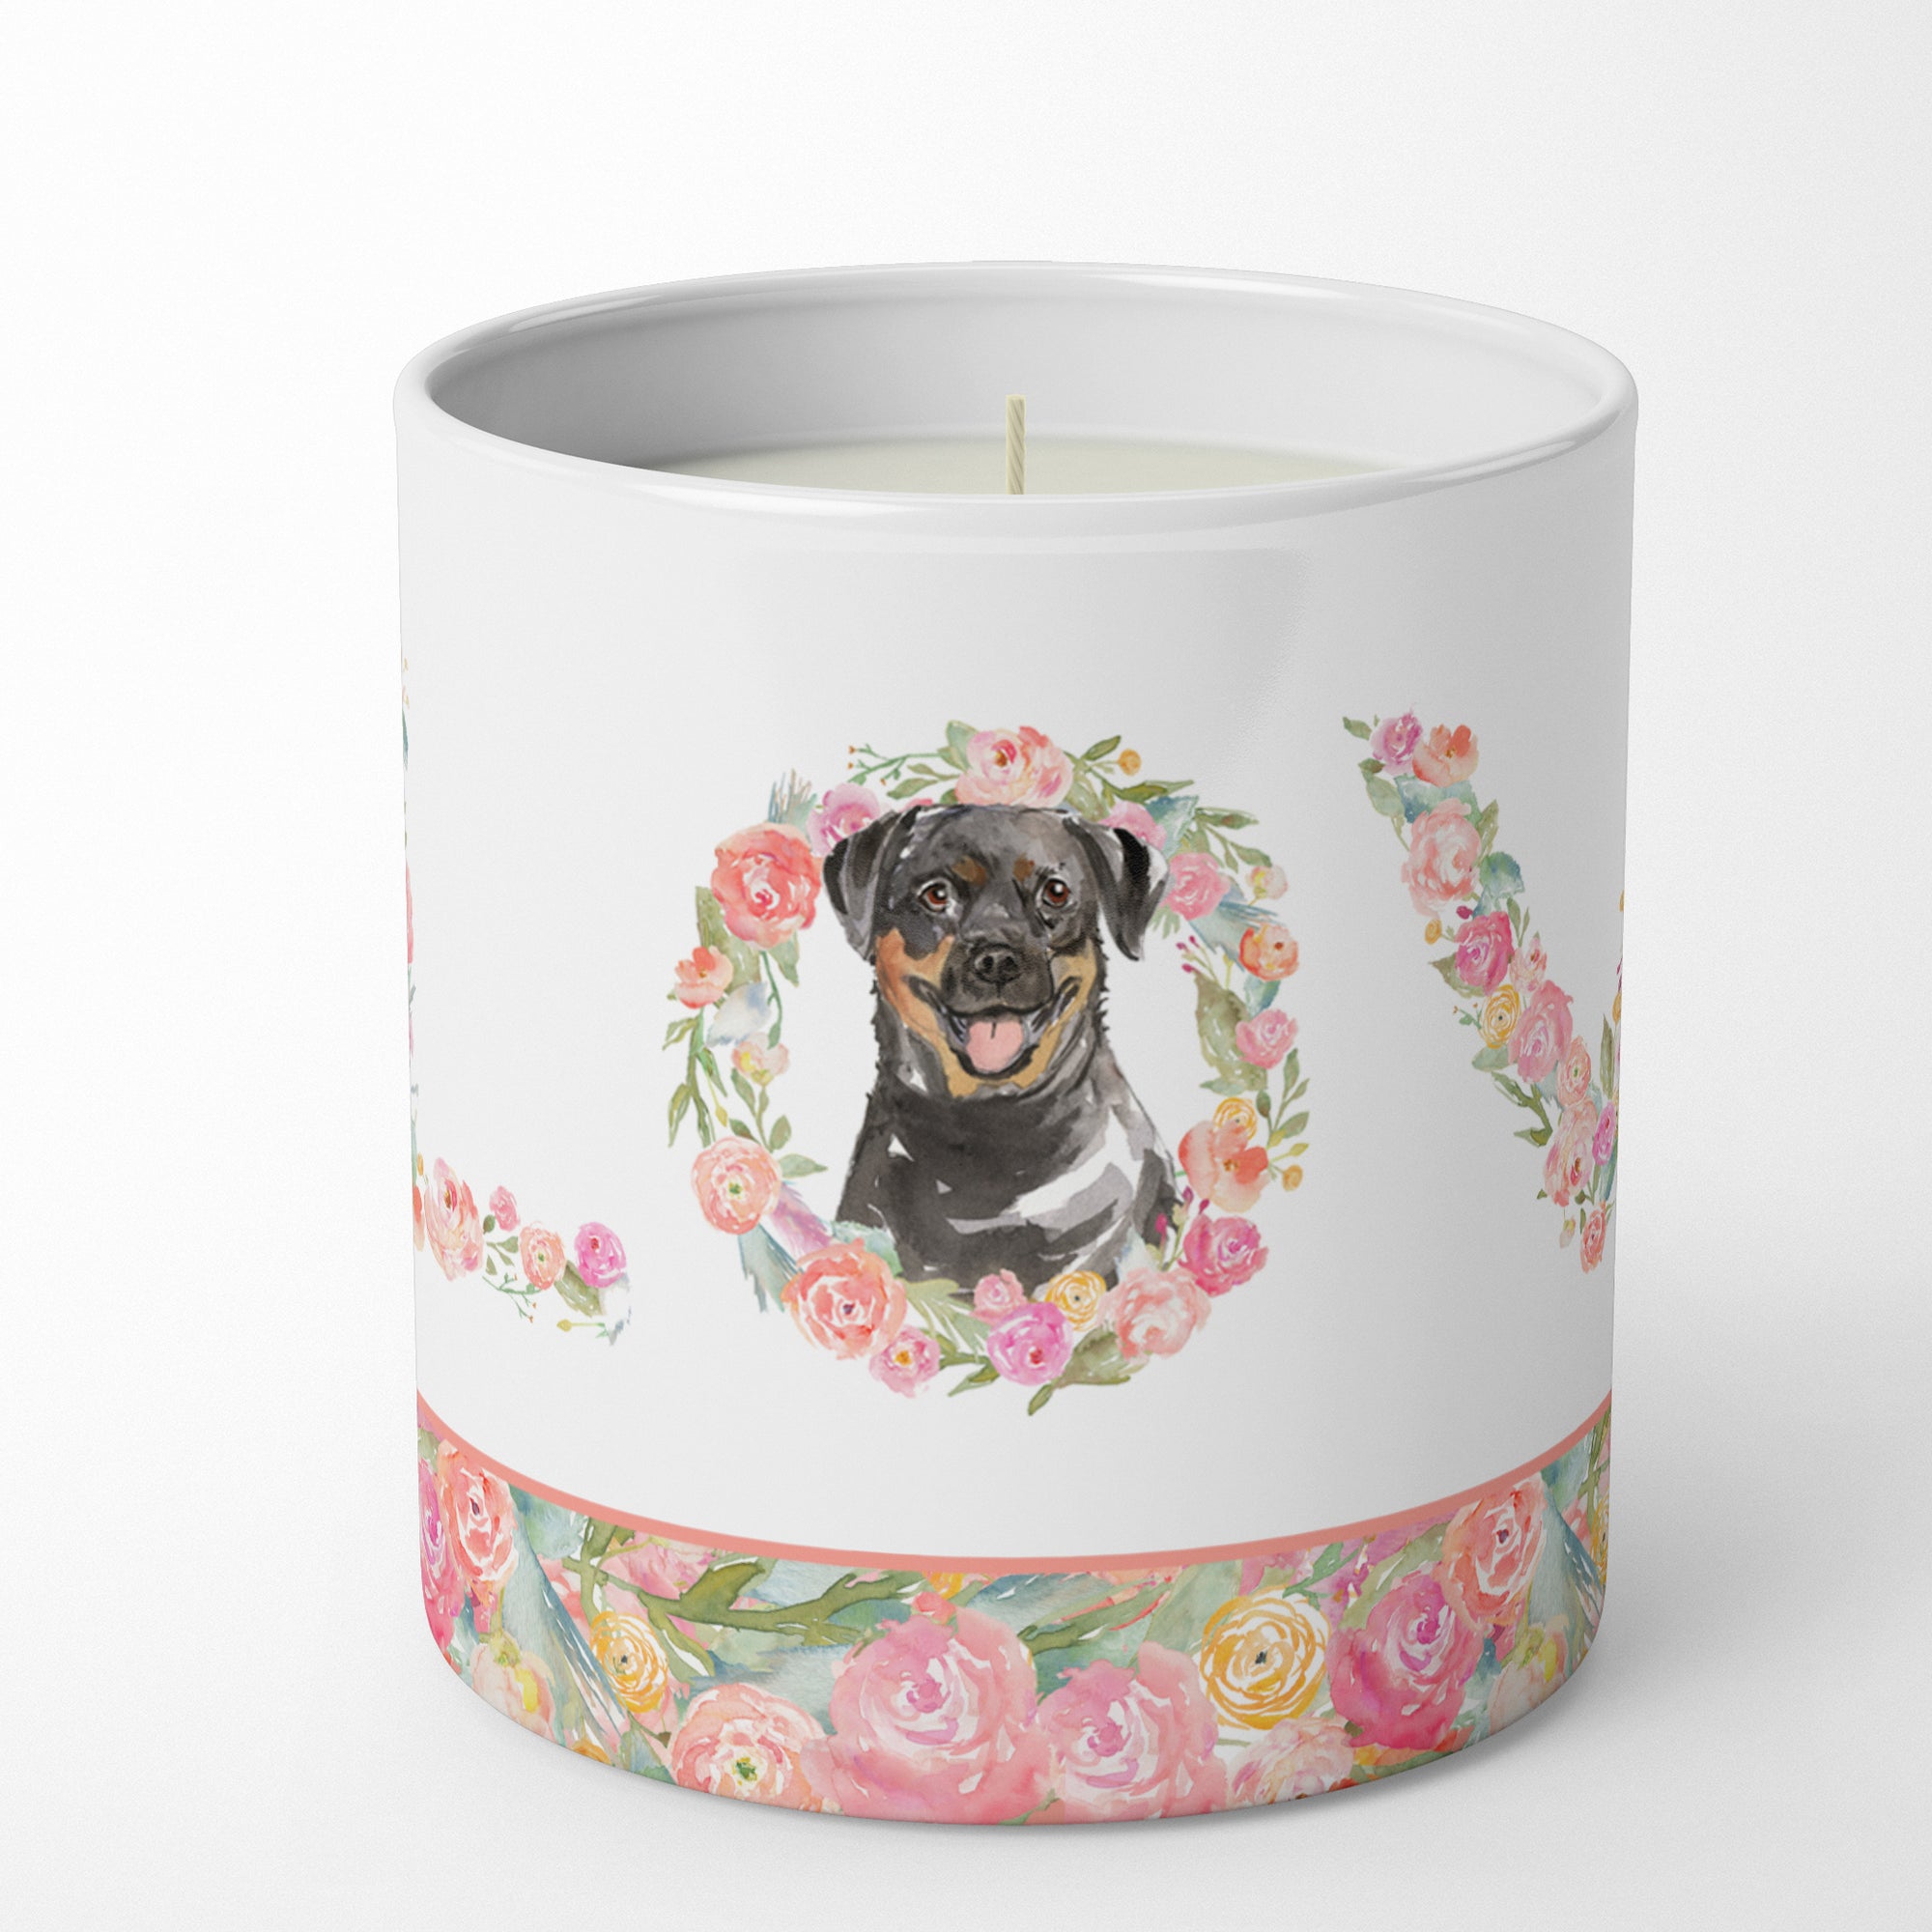 Buy this Rottweiler Love 10 oz Decorative Soy Candle